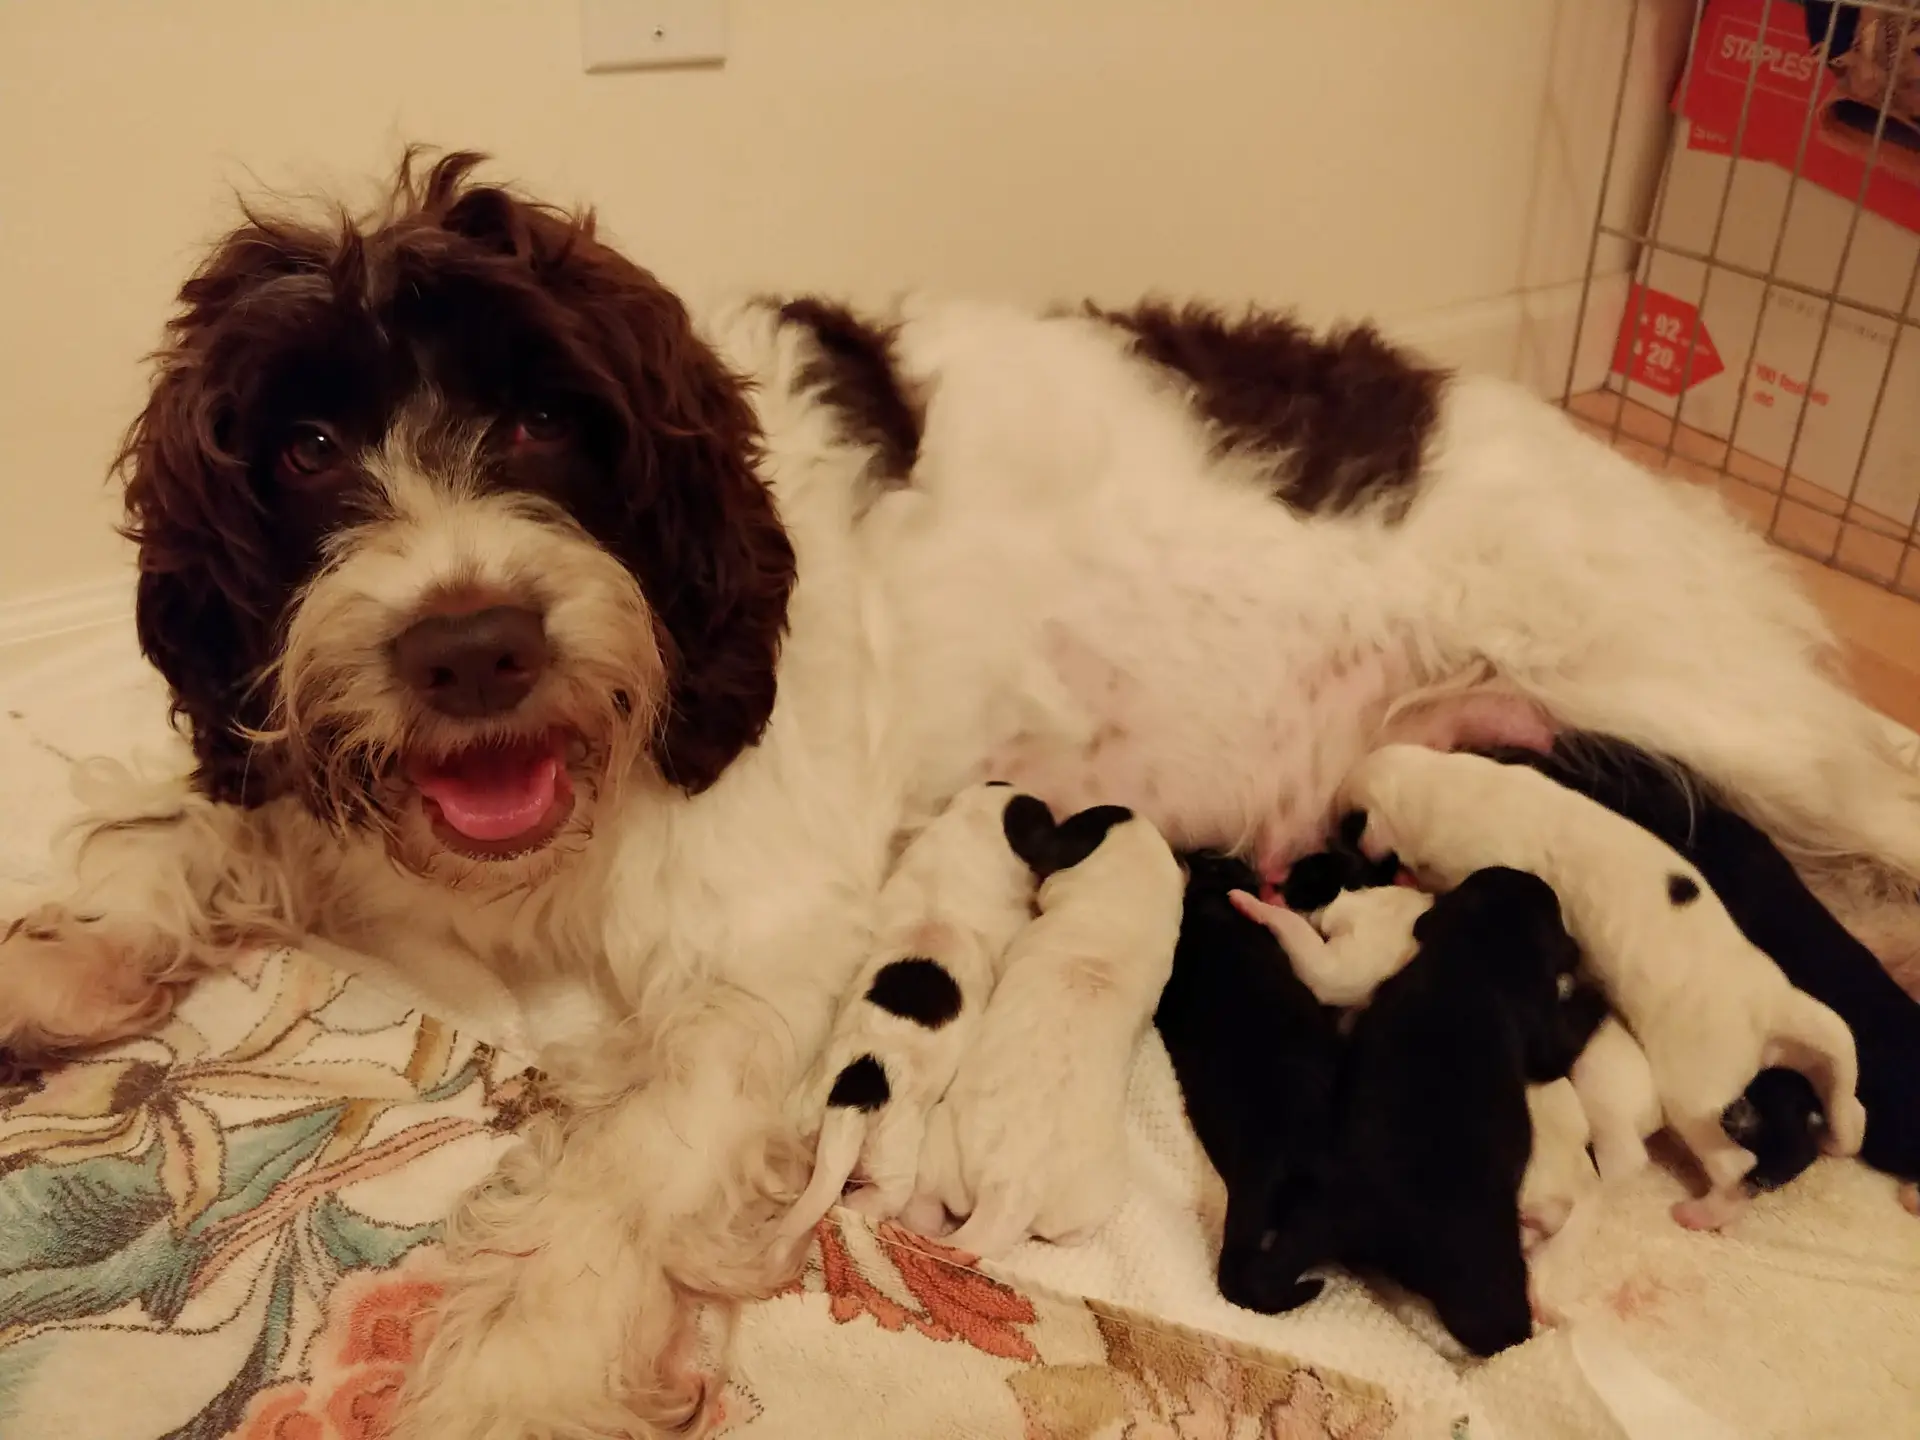 Chocolate Parti pattern Mama dog, lying on her side with a bundle of newborn puppies nursing. The puppies are black, and black and white parti patterns. There are 11 puppies in this litter.